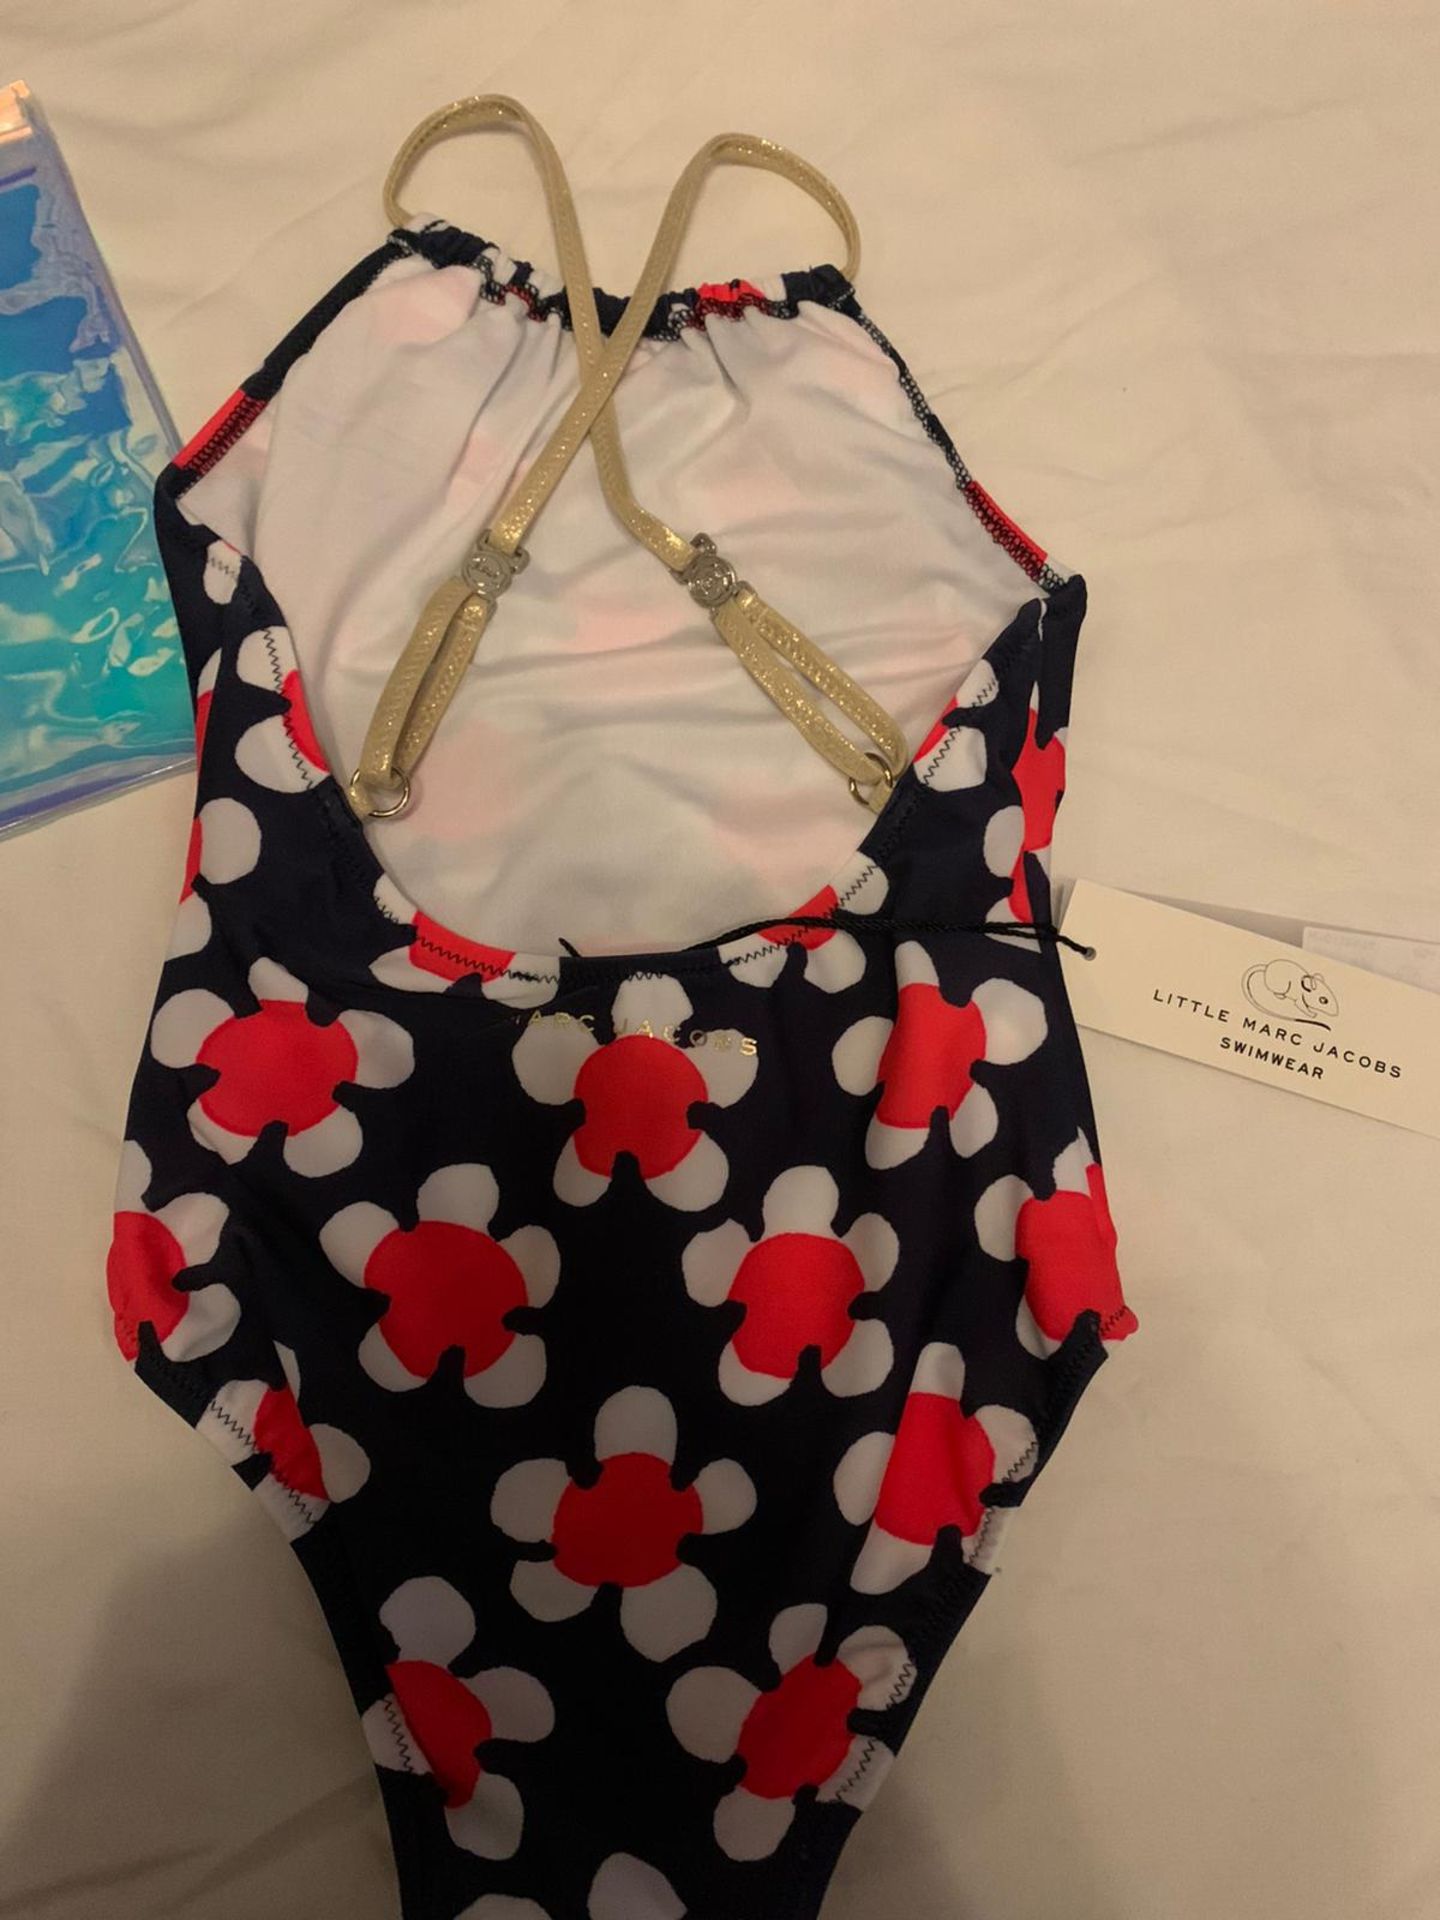 LITTLE MARC JACOBS FLORAL SWIMSUIT WITH WET BAG - AGE 5 - Image 3 of 4